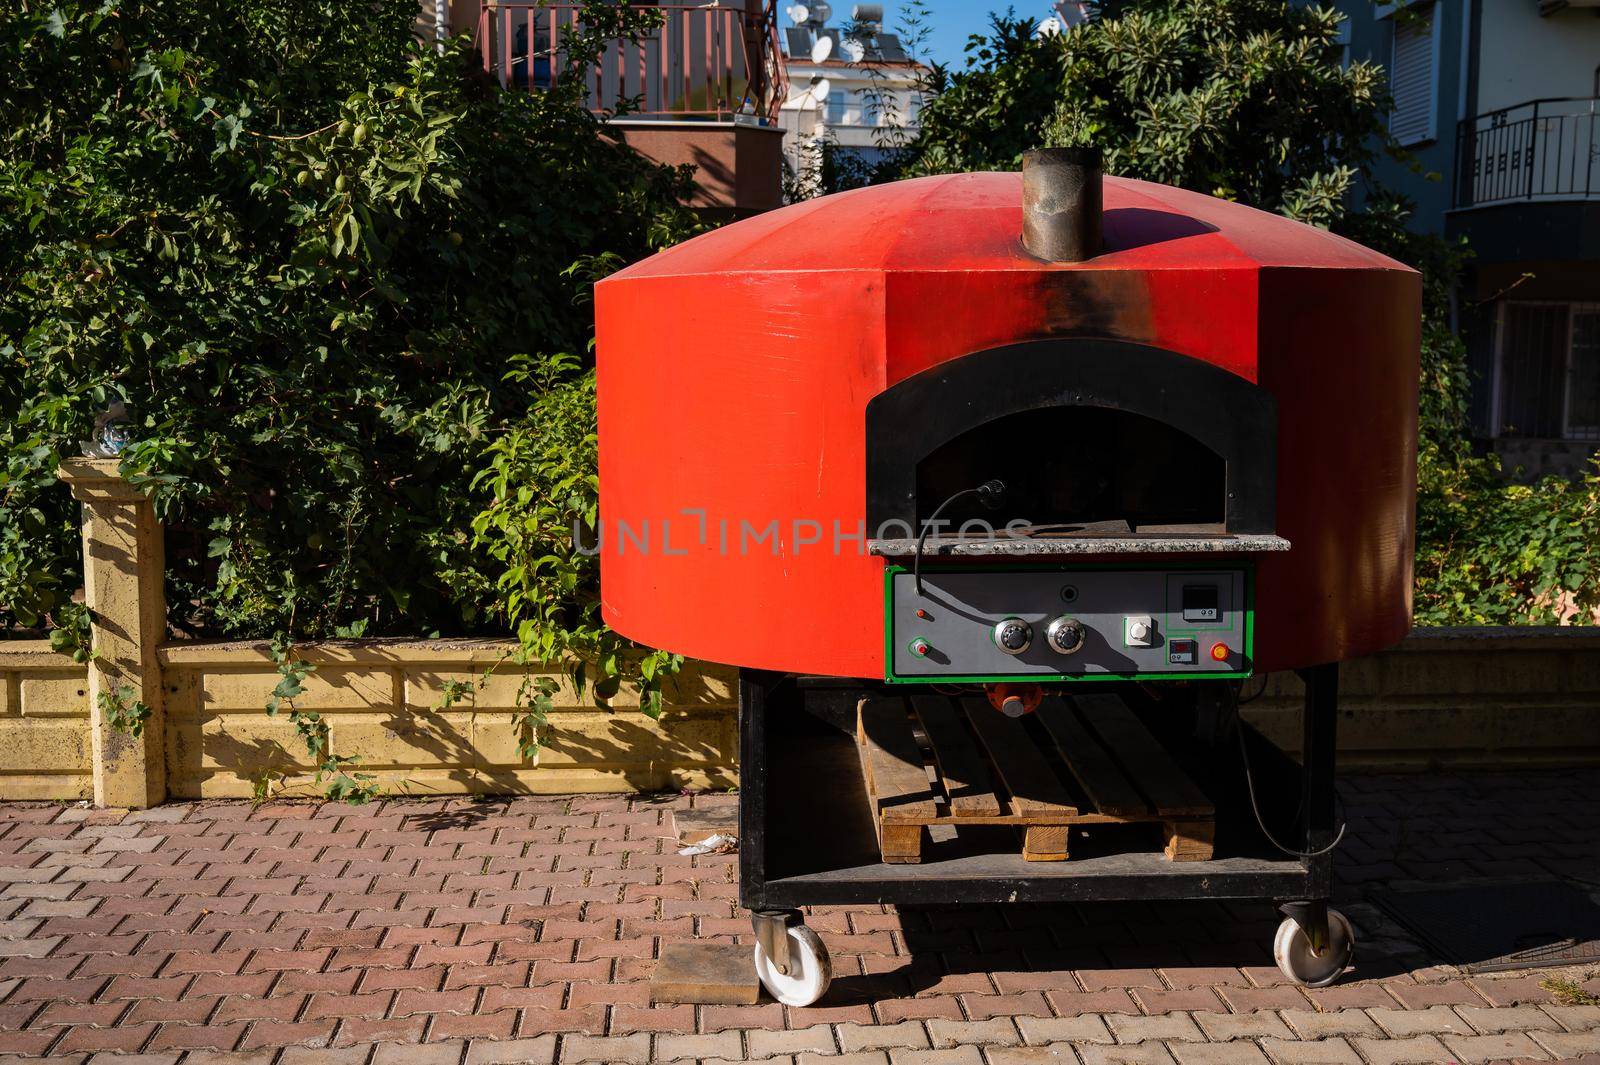 Large domed red metal outdoor pizza oven. by mrwed54